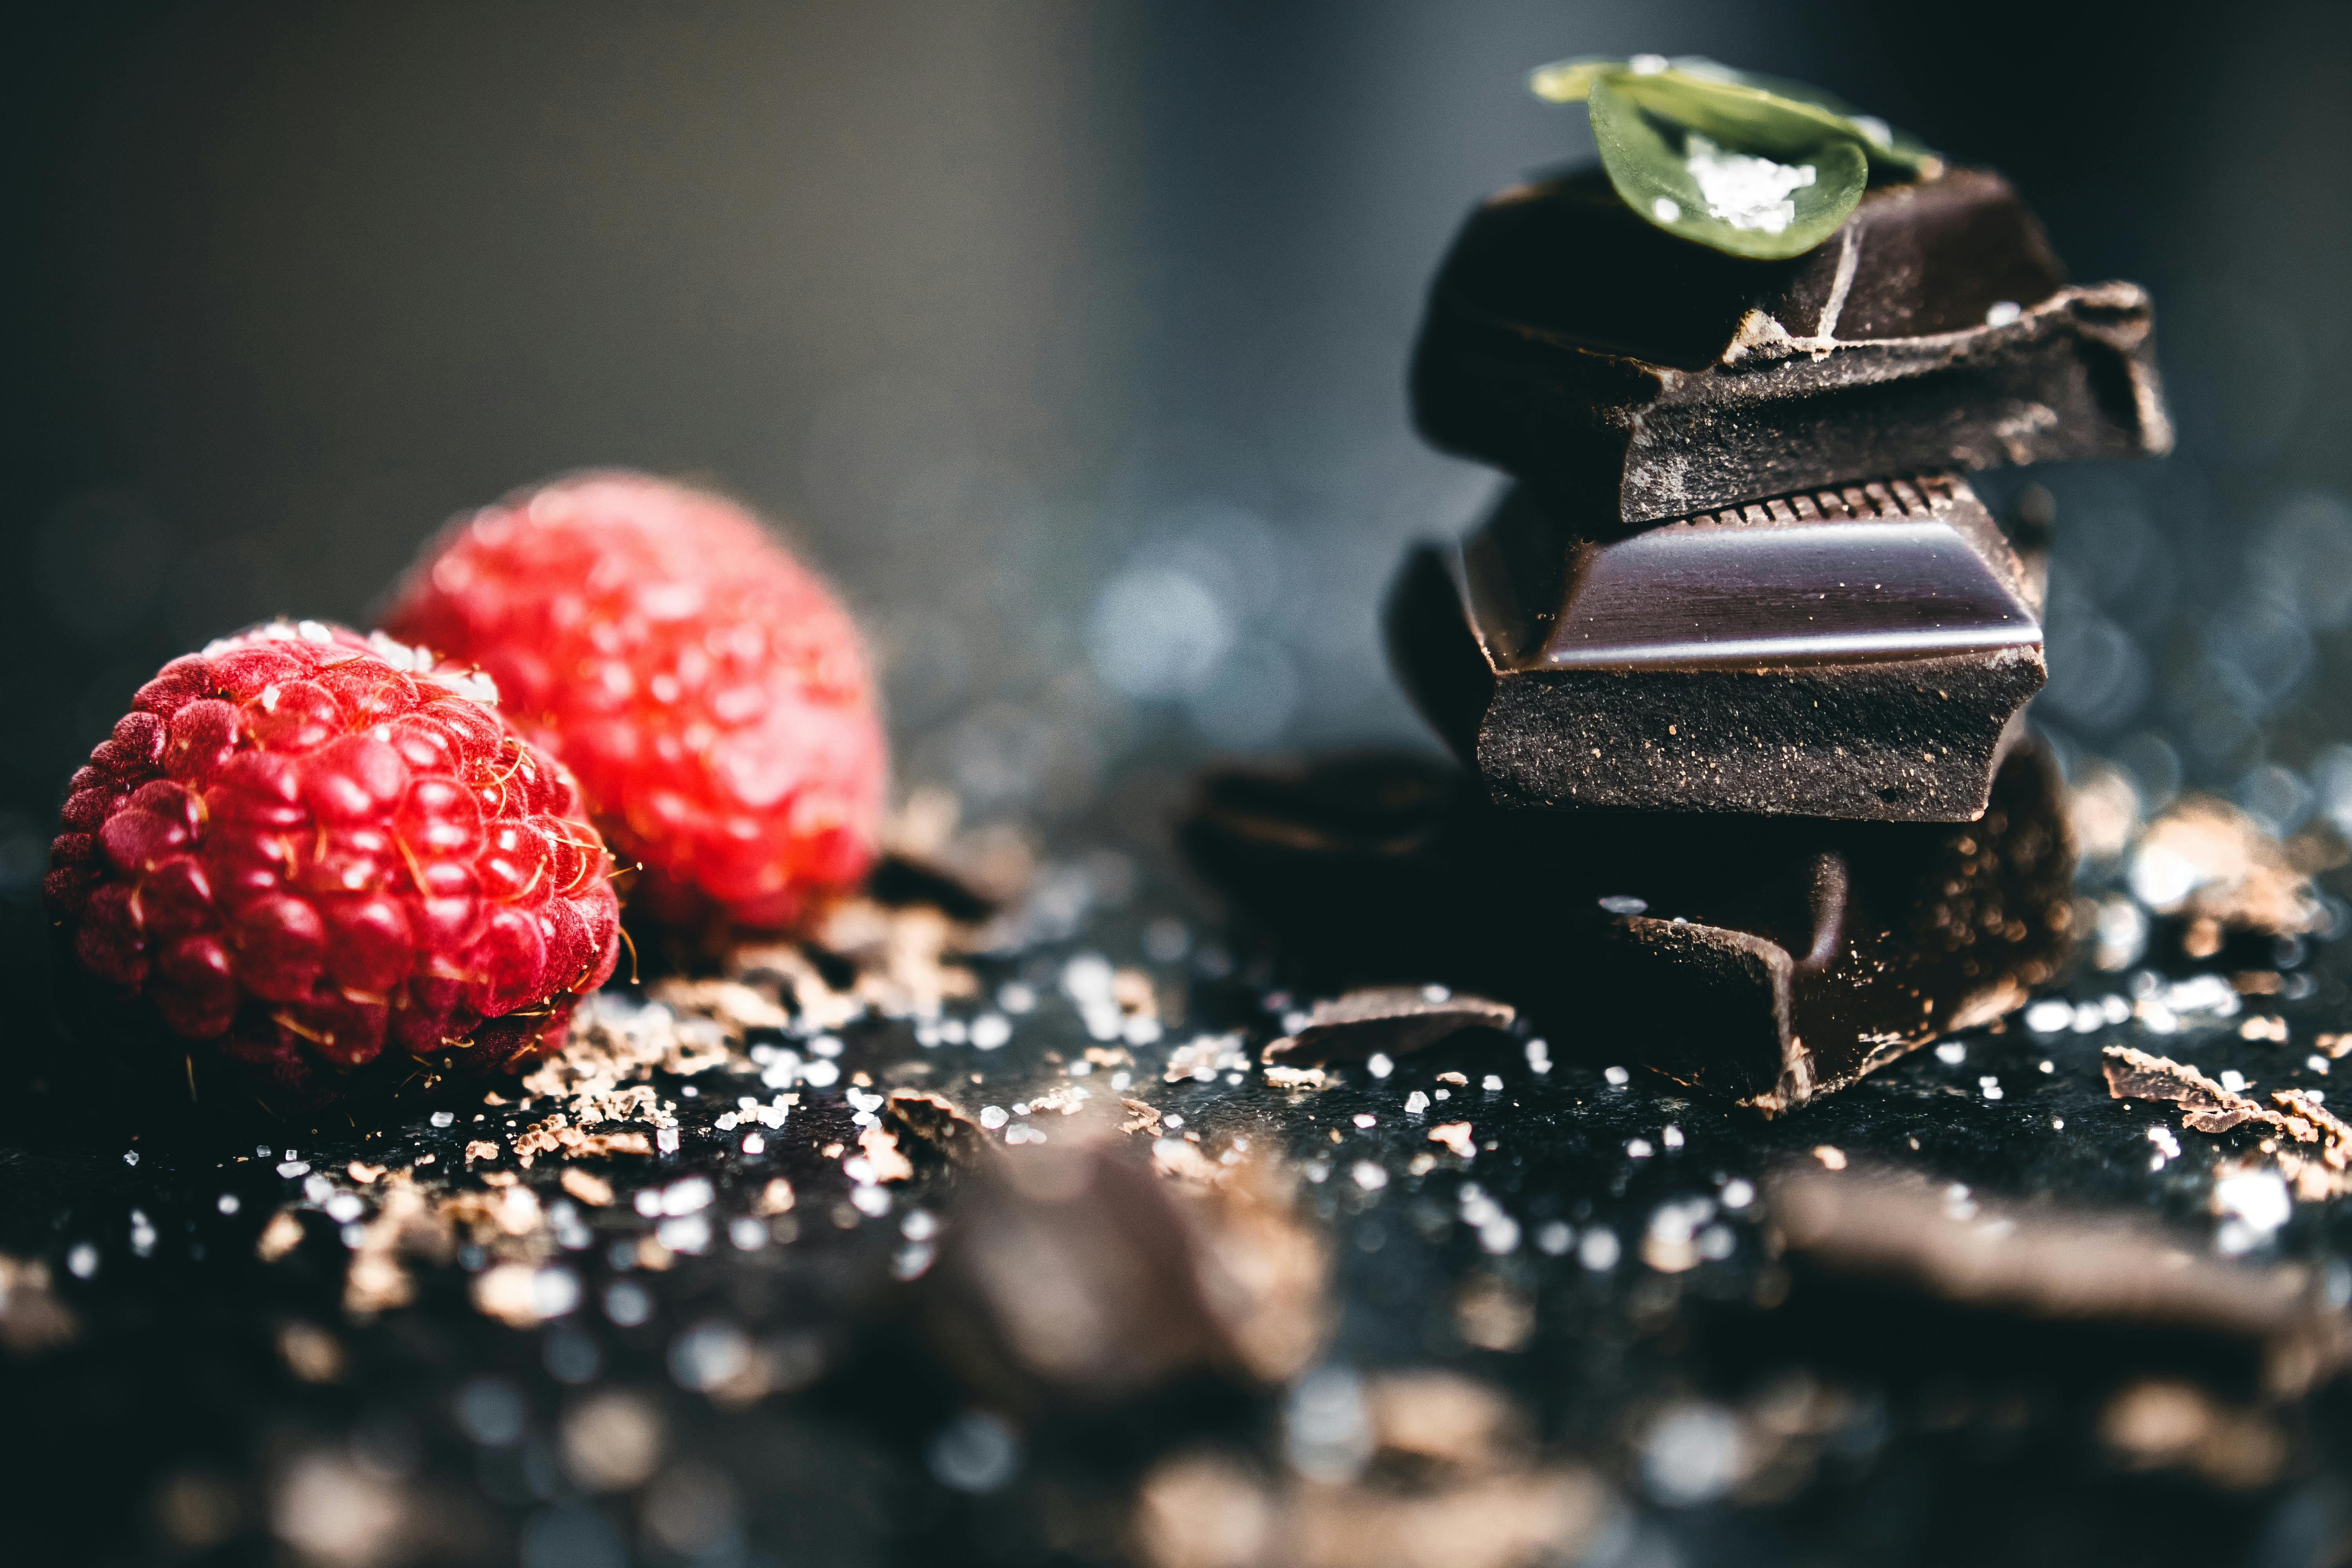 Decadent chocolate pieces and berries | Source: Pexels